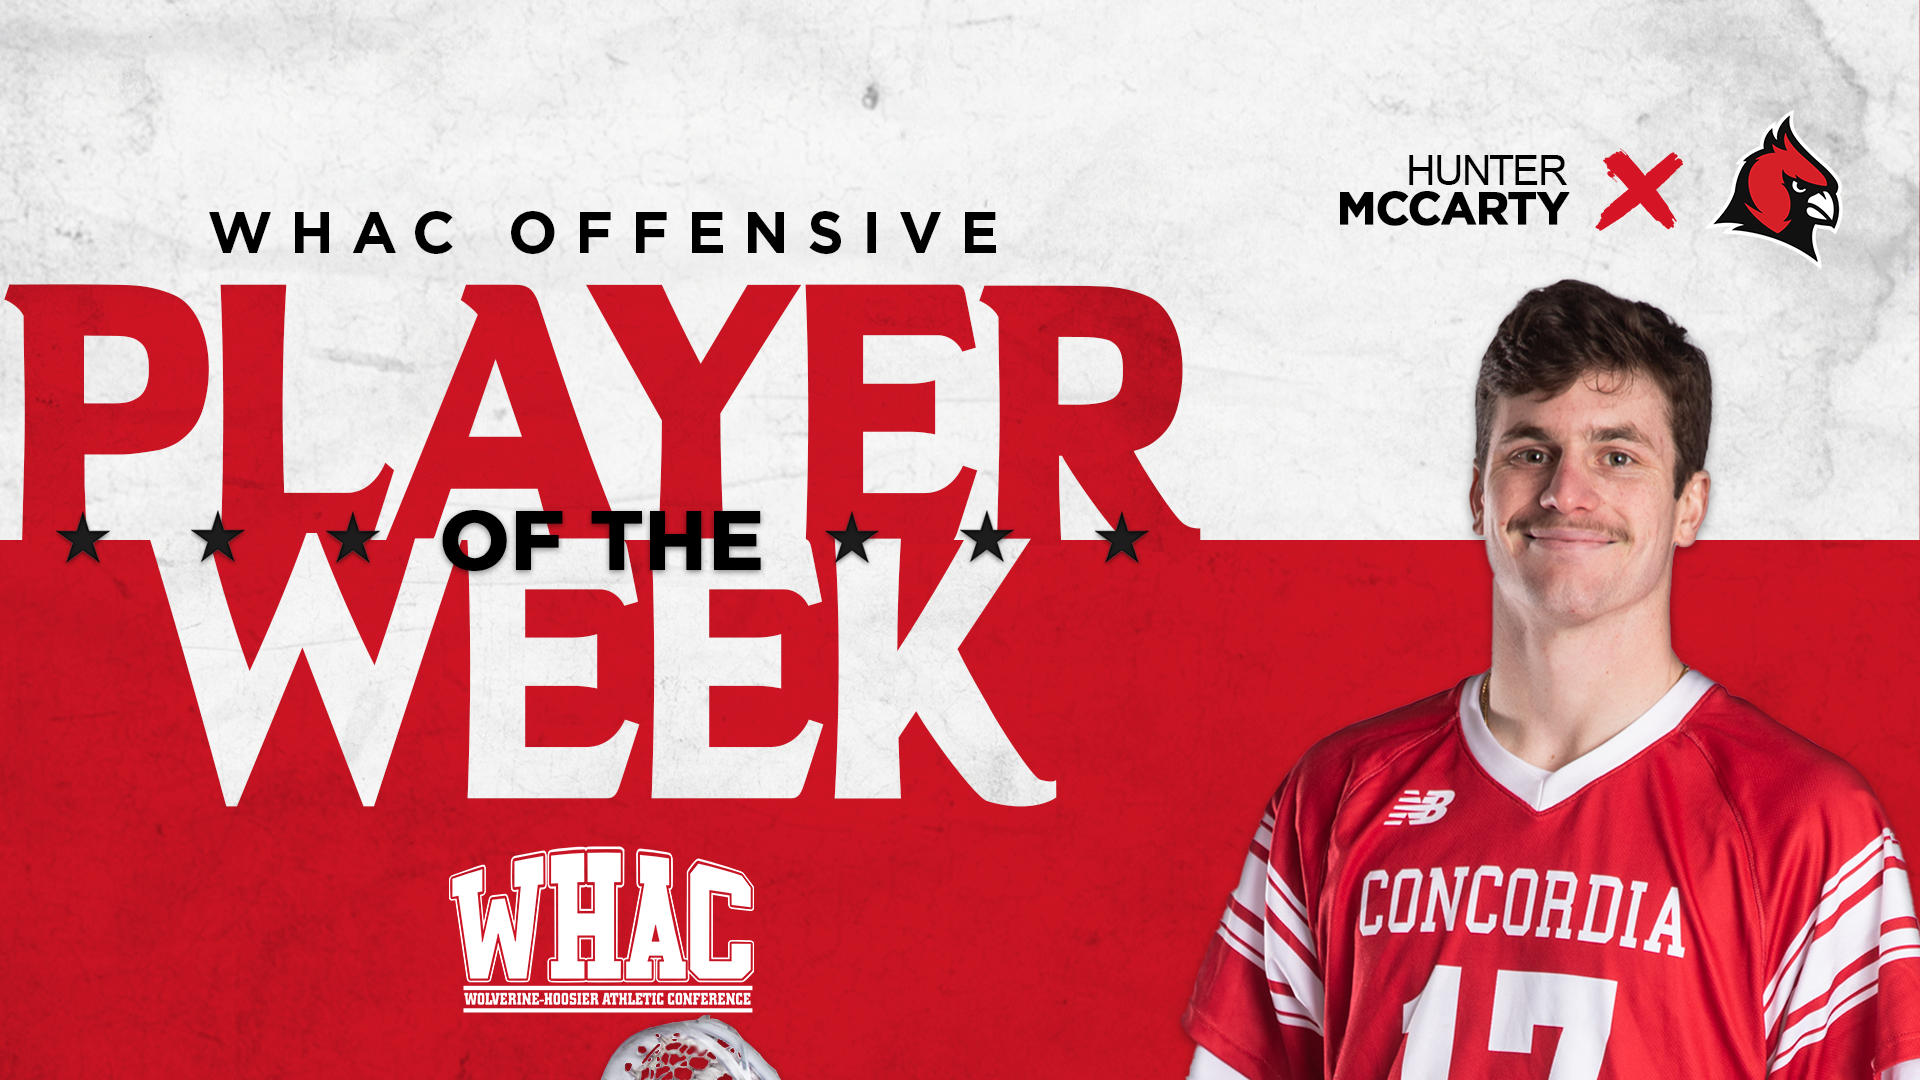 Hunter McCarty earns WHAC player of the Week honors